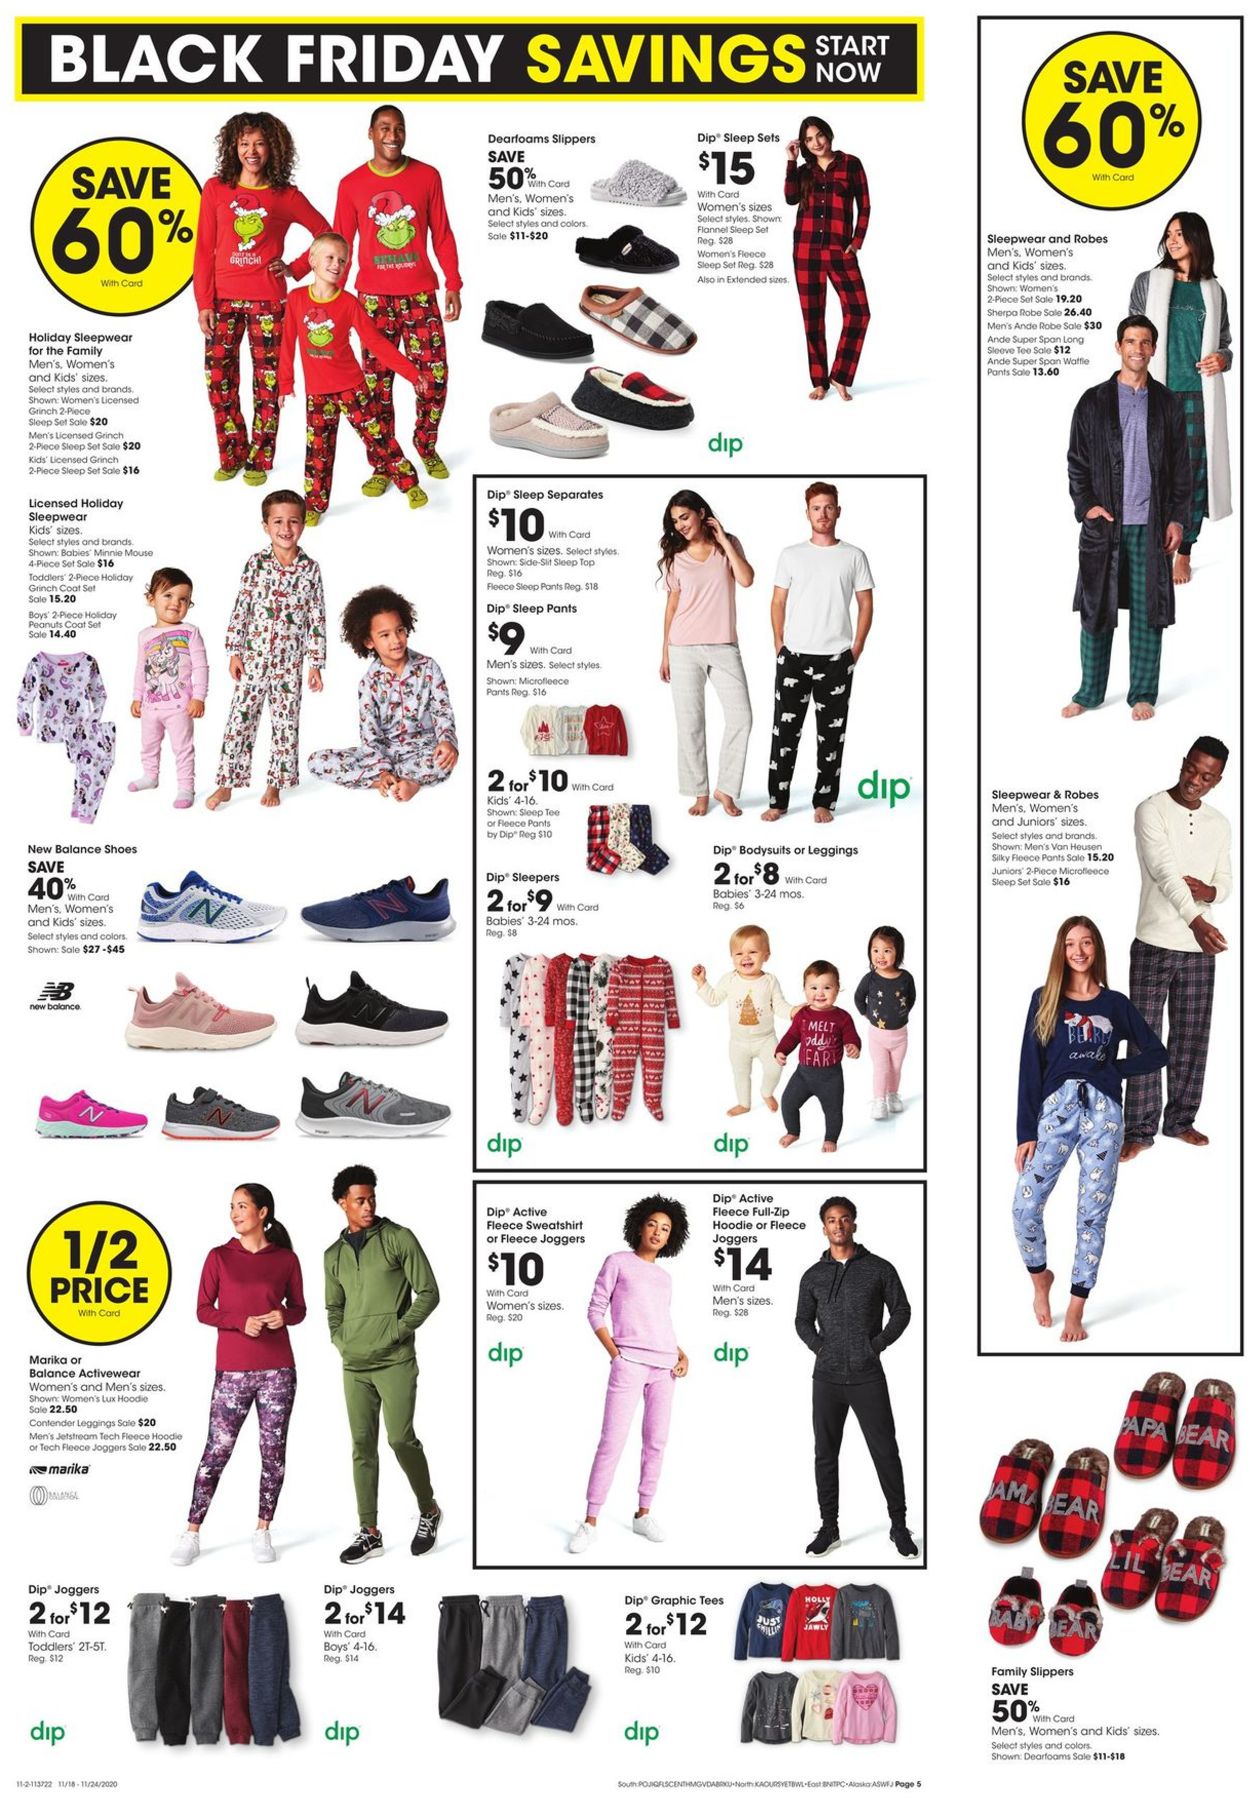 Catalogue Fred Meyer Black Friday ad 2020 from 11/18/2020